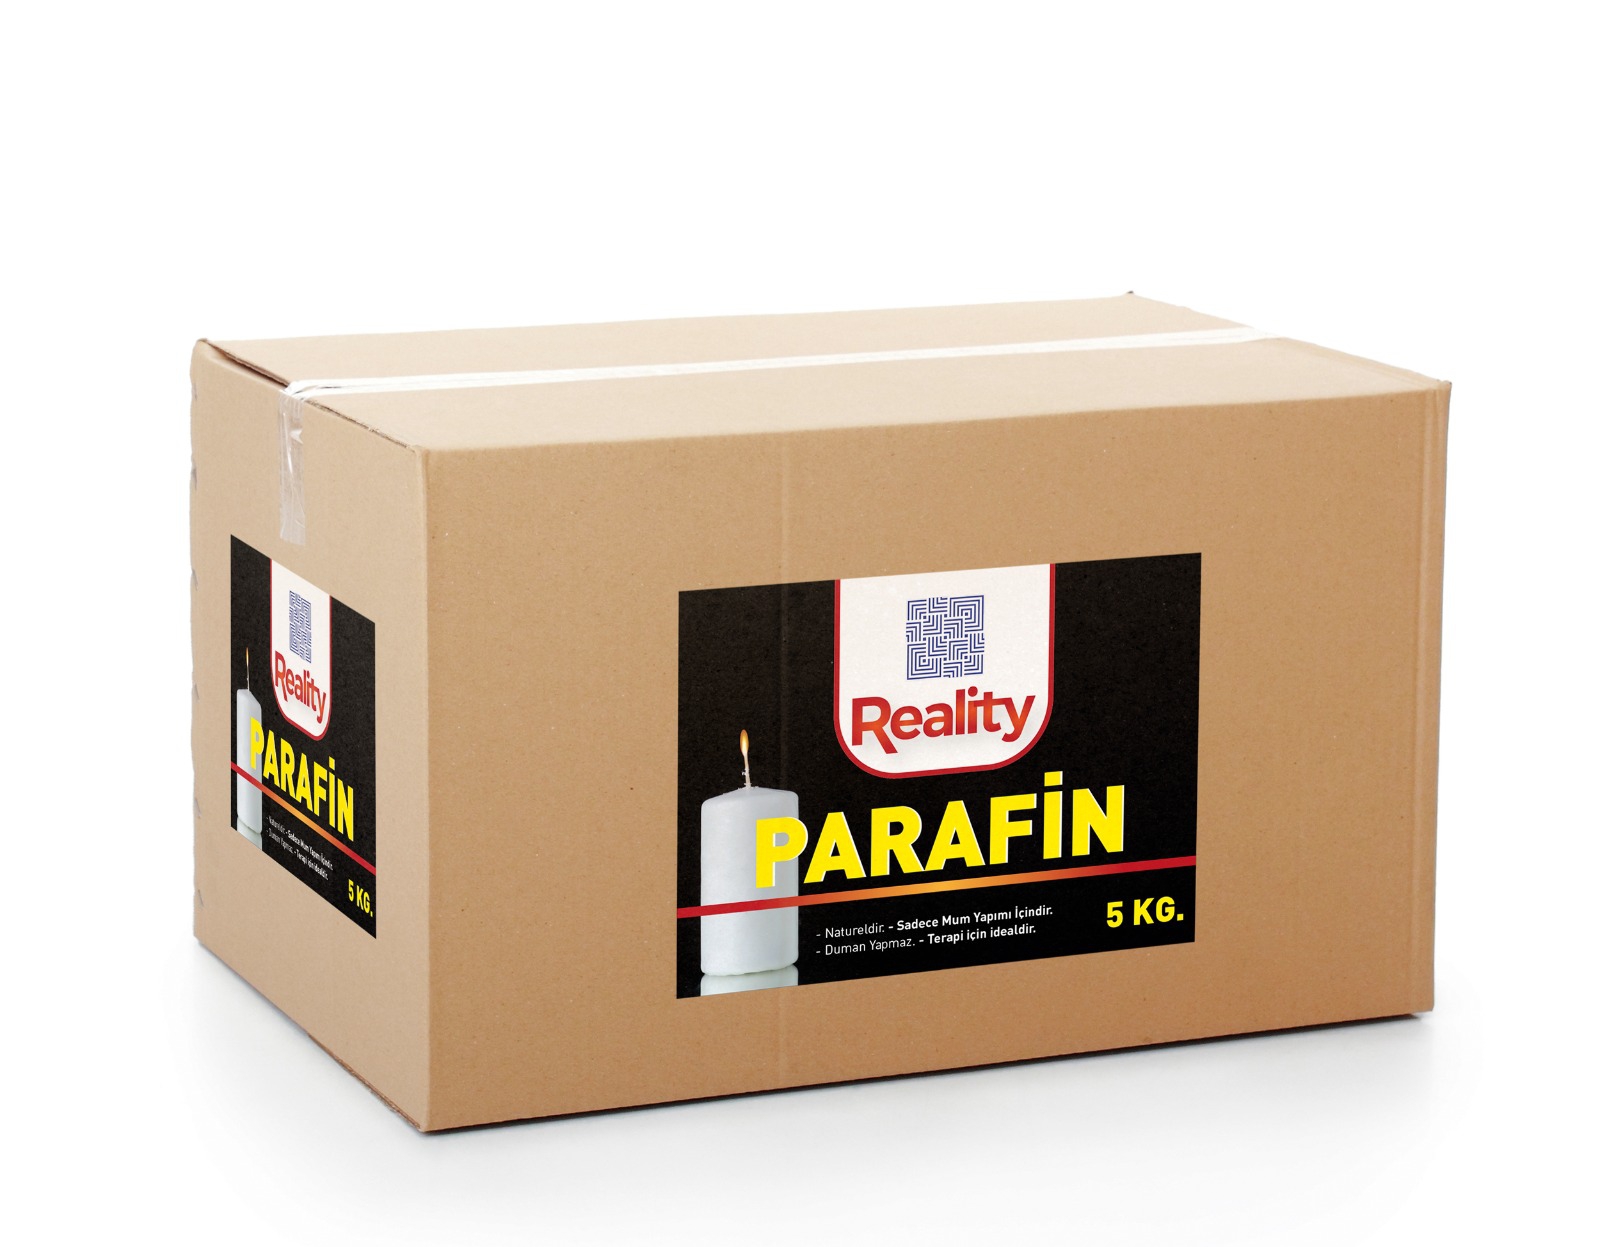 Reality Parafin Wax (5 Kg.)